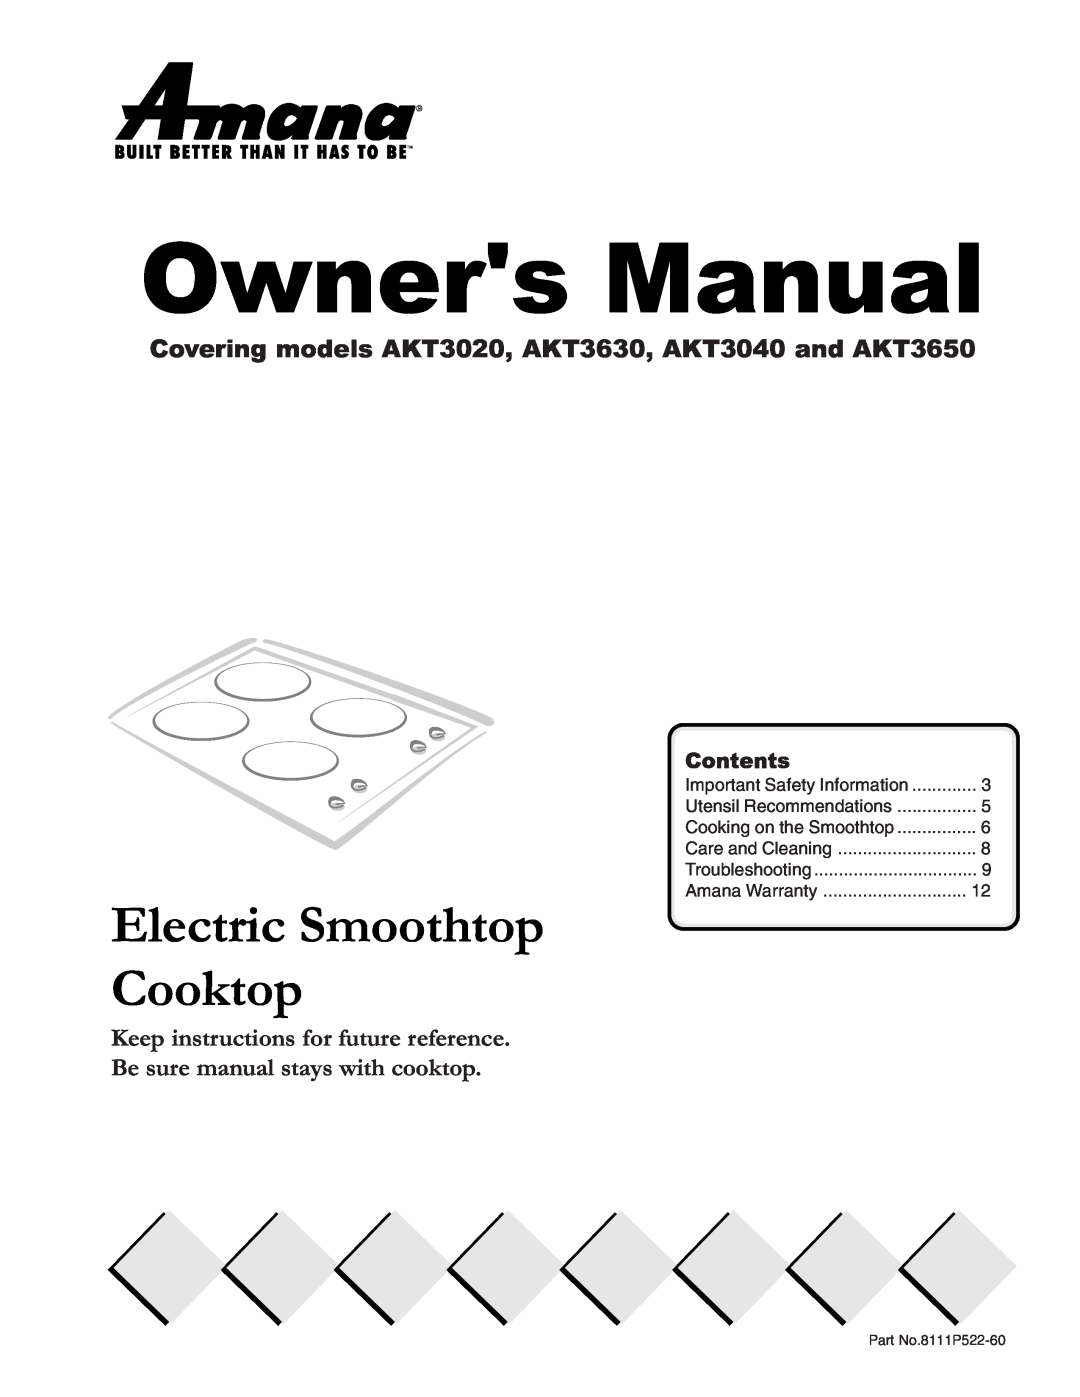 Cook Manufacturing akt3650 owner manual Covering models AKT3020, AKT3630, AKT3040 and AKT3650, Electric Smoothtop Cooktop 